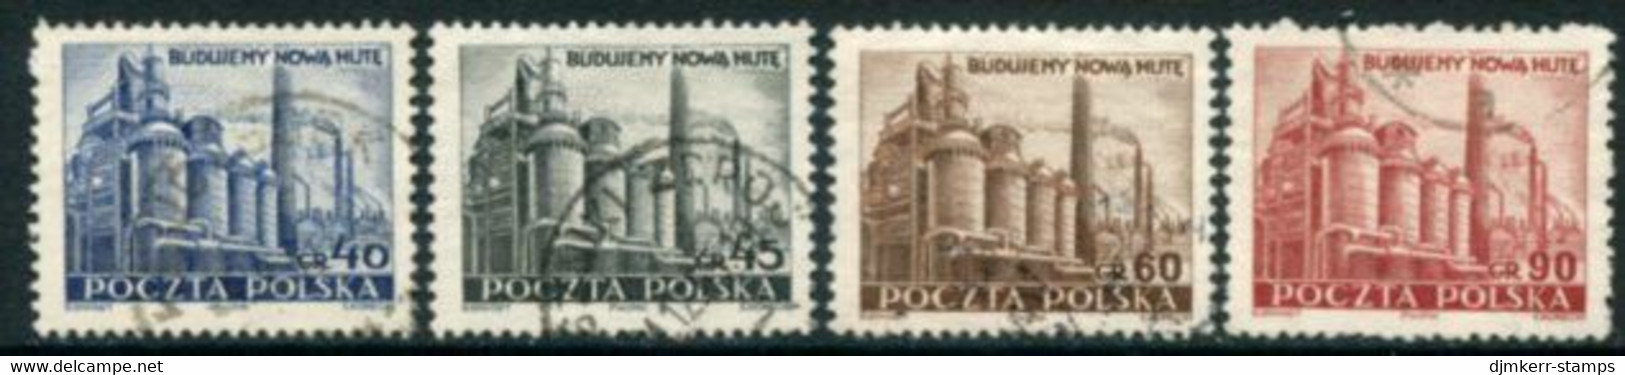 POLAND 1951 Heavy Industry Used.  Michel 690-93 - Usados